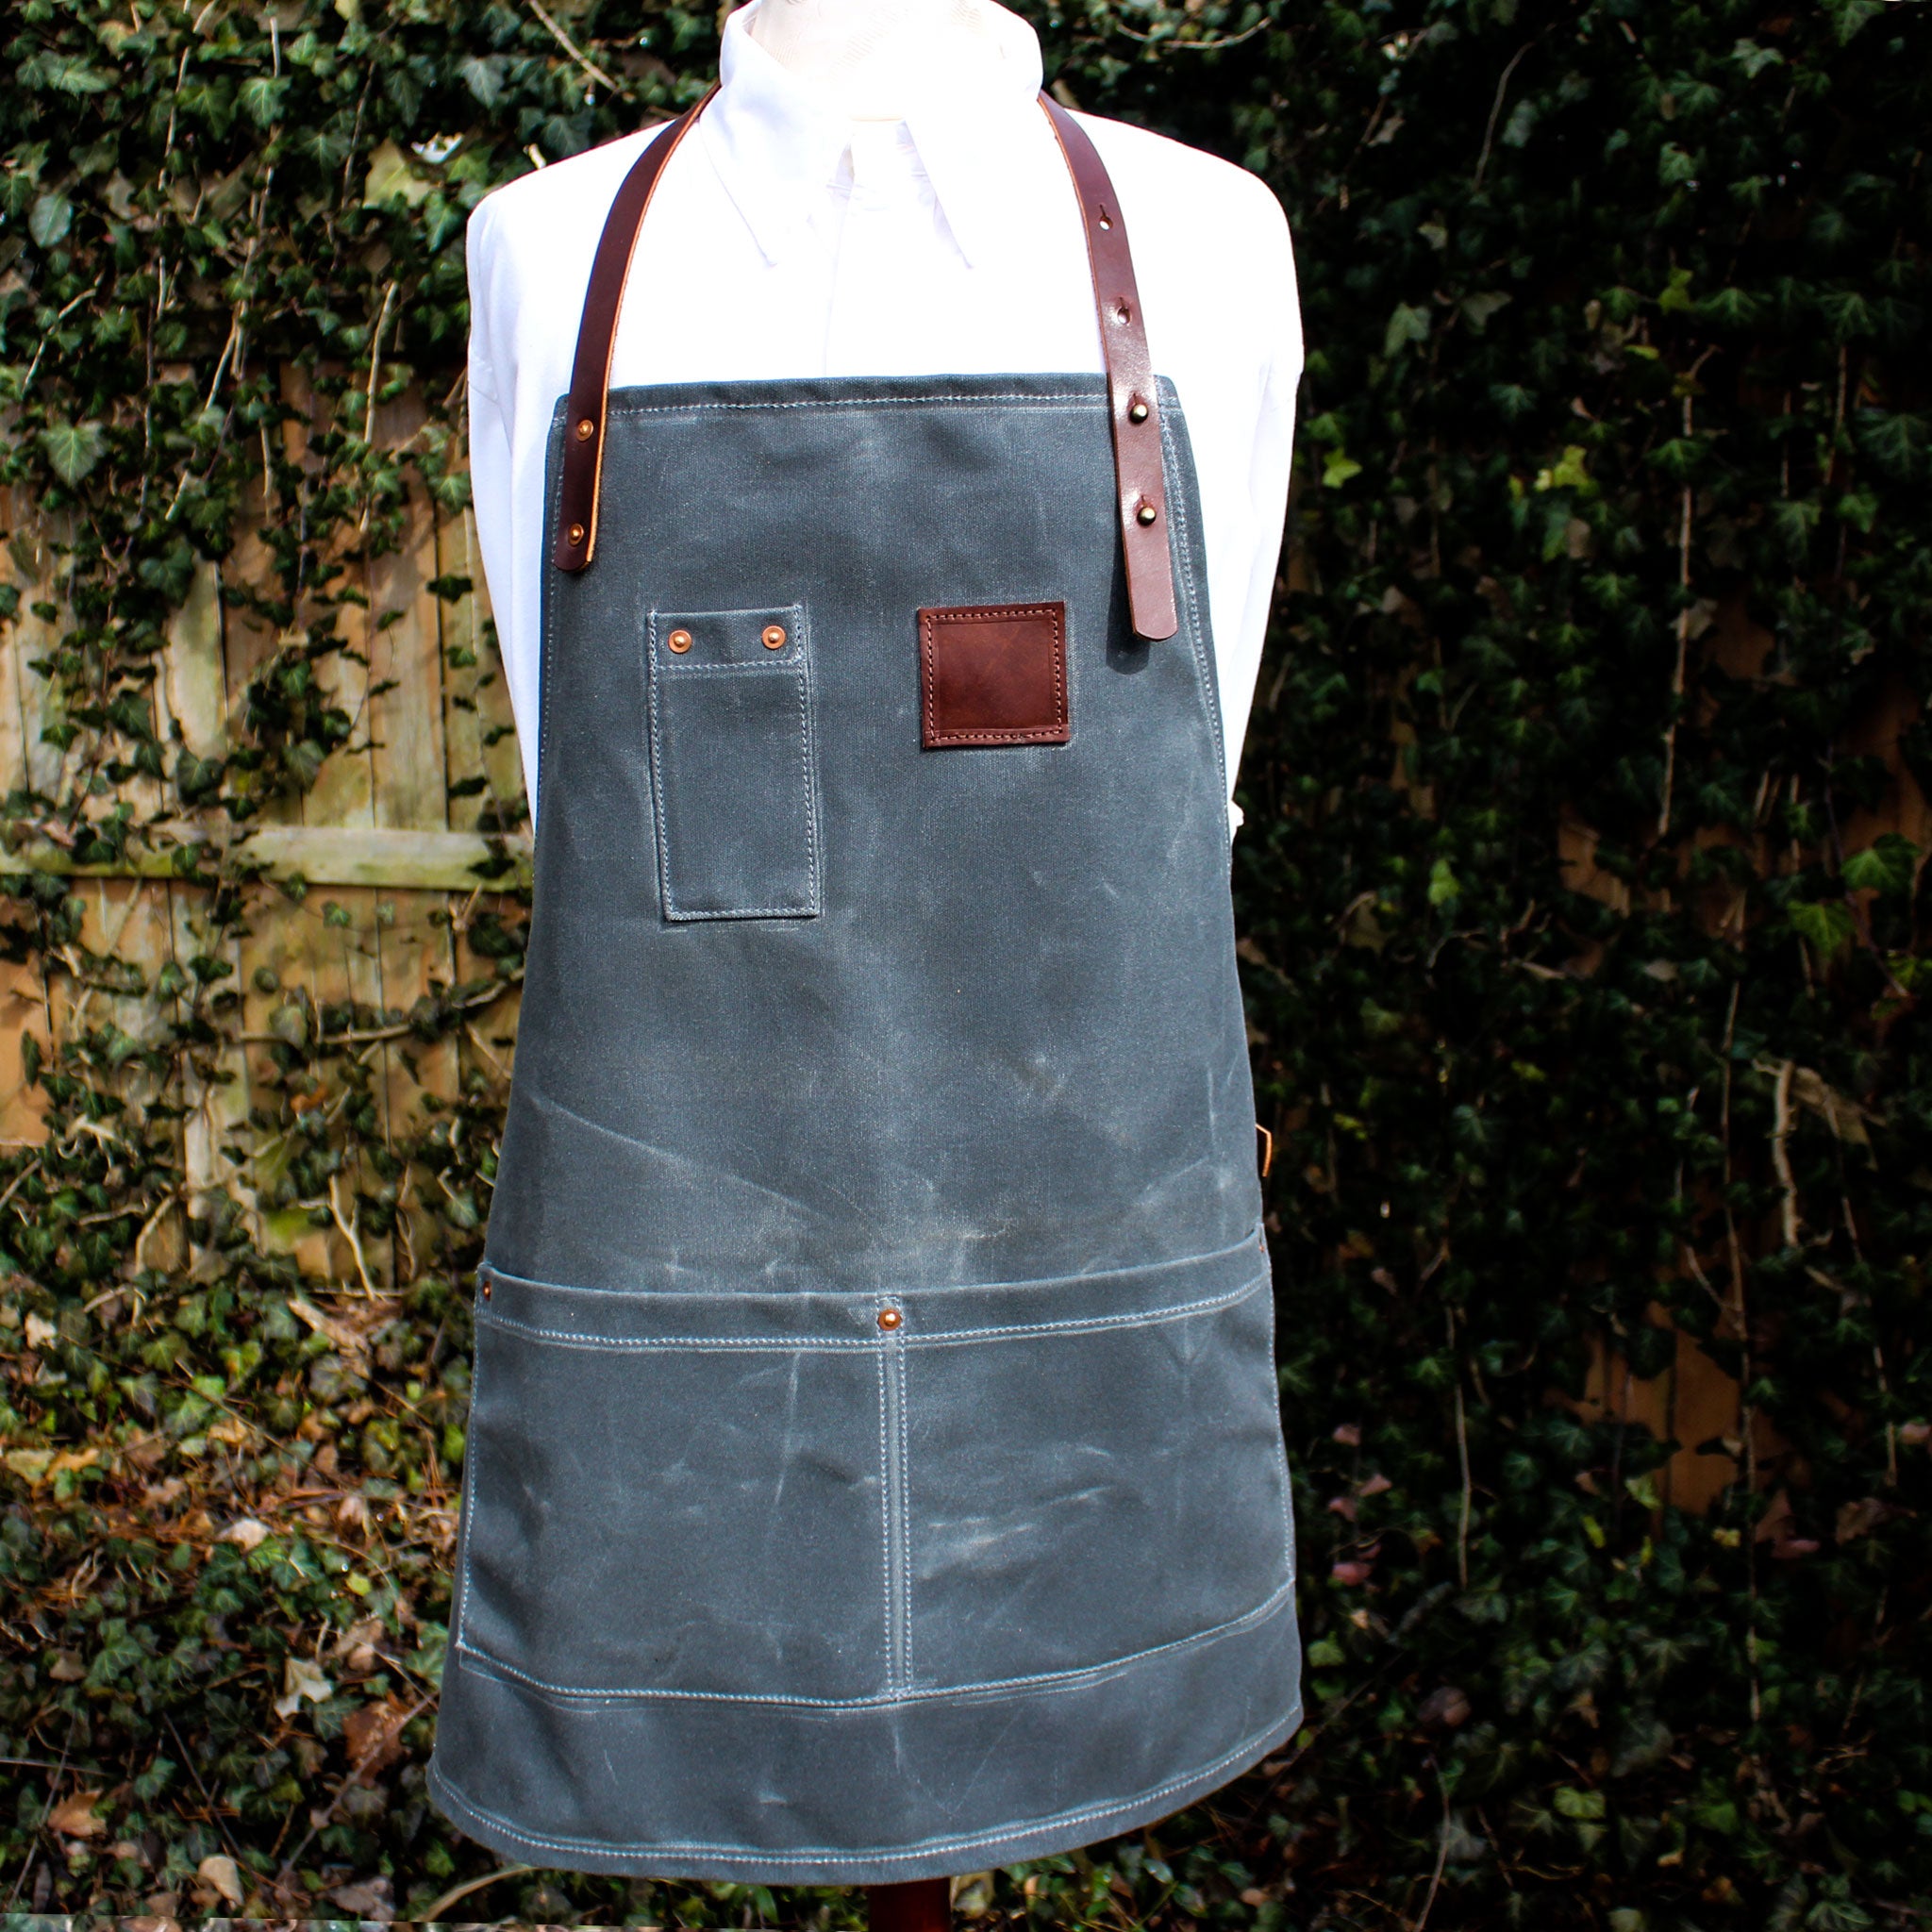 Fabric “waiter” apron with leather straps